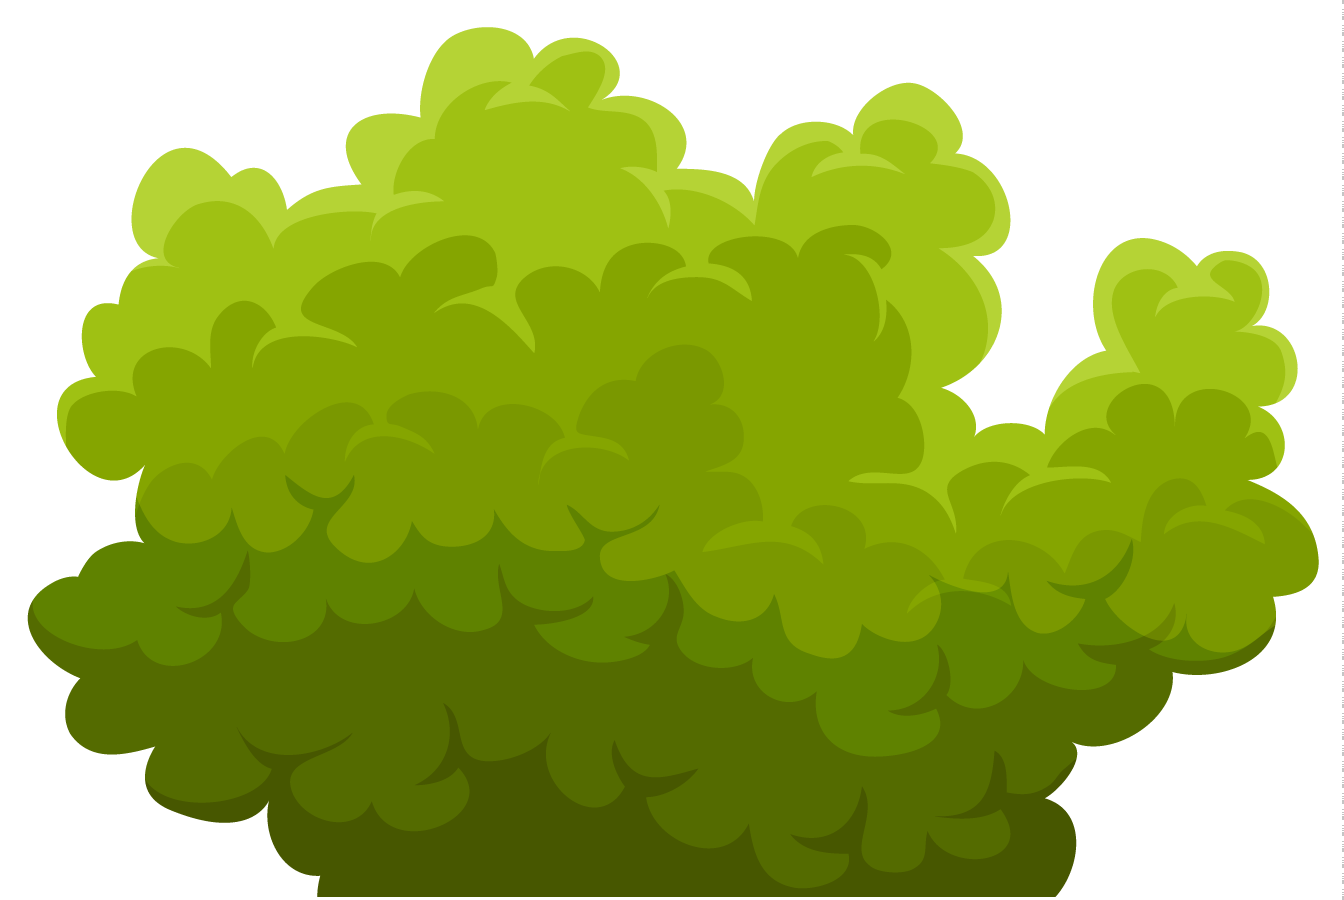 Free Cartoon Bush Png Download Free Cartoon Bush Png Png Images Free Cliparts On Clipart Library